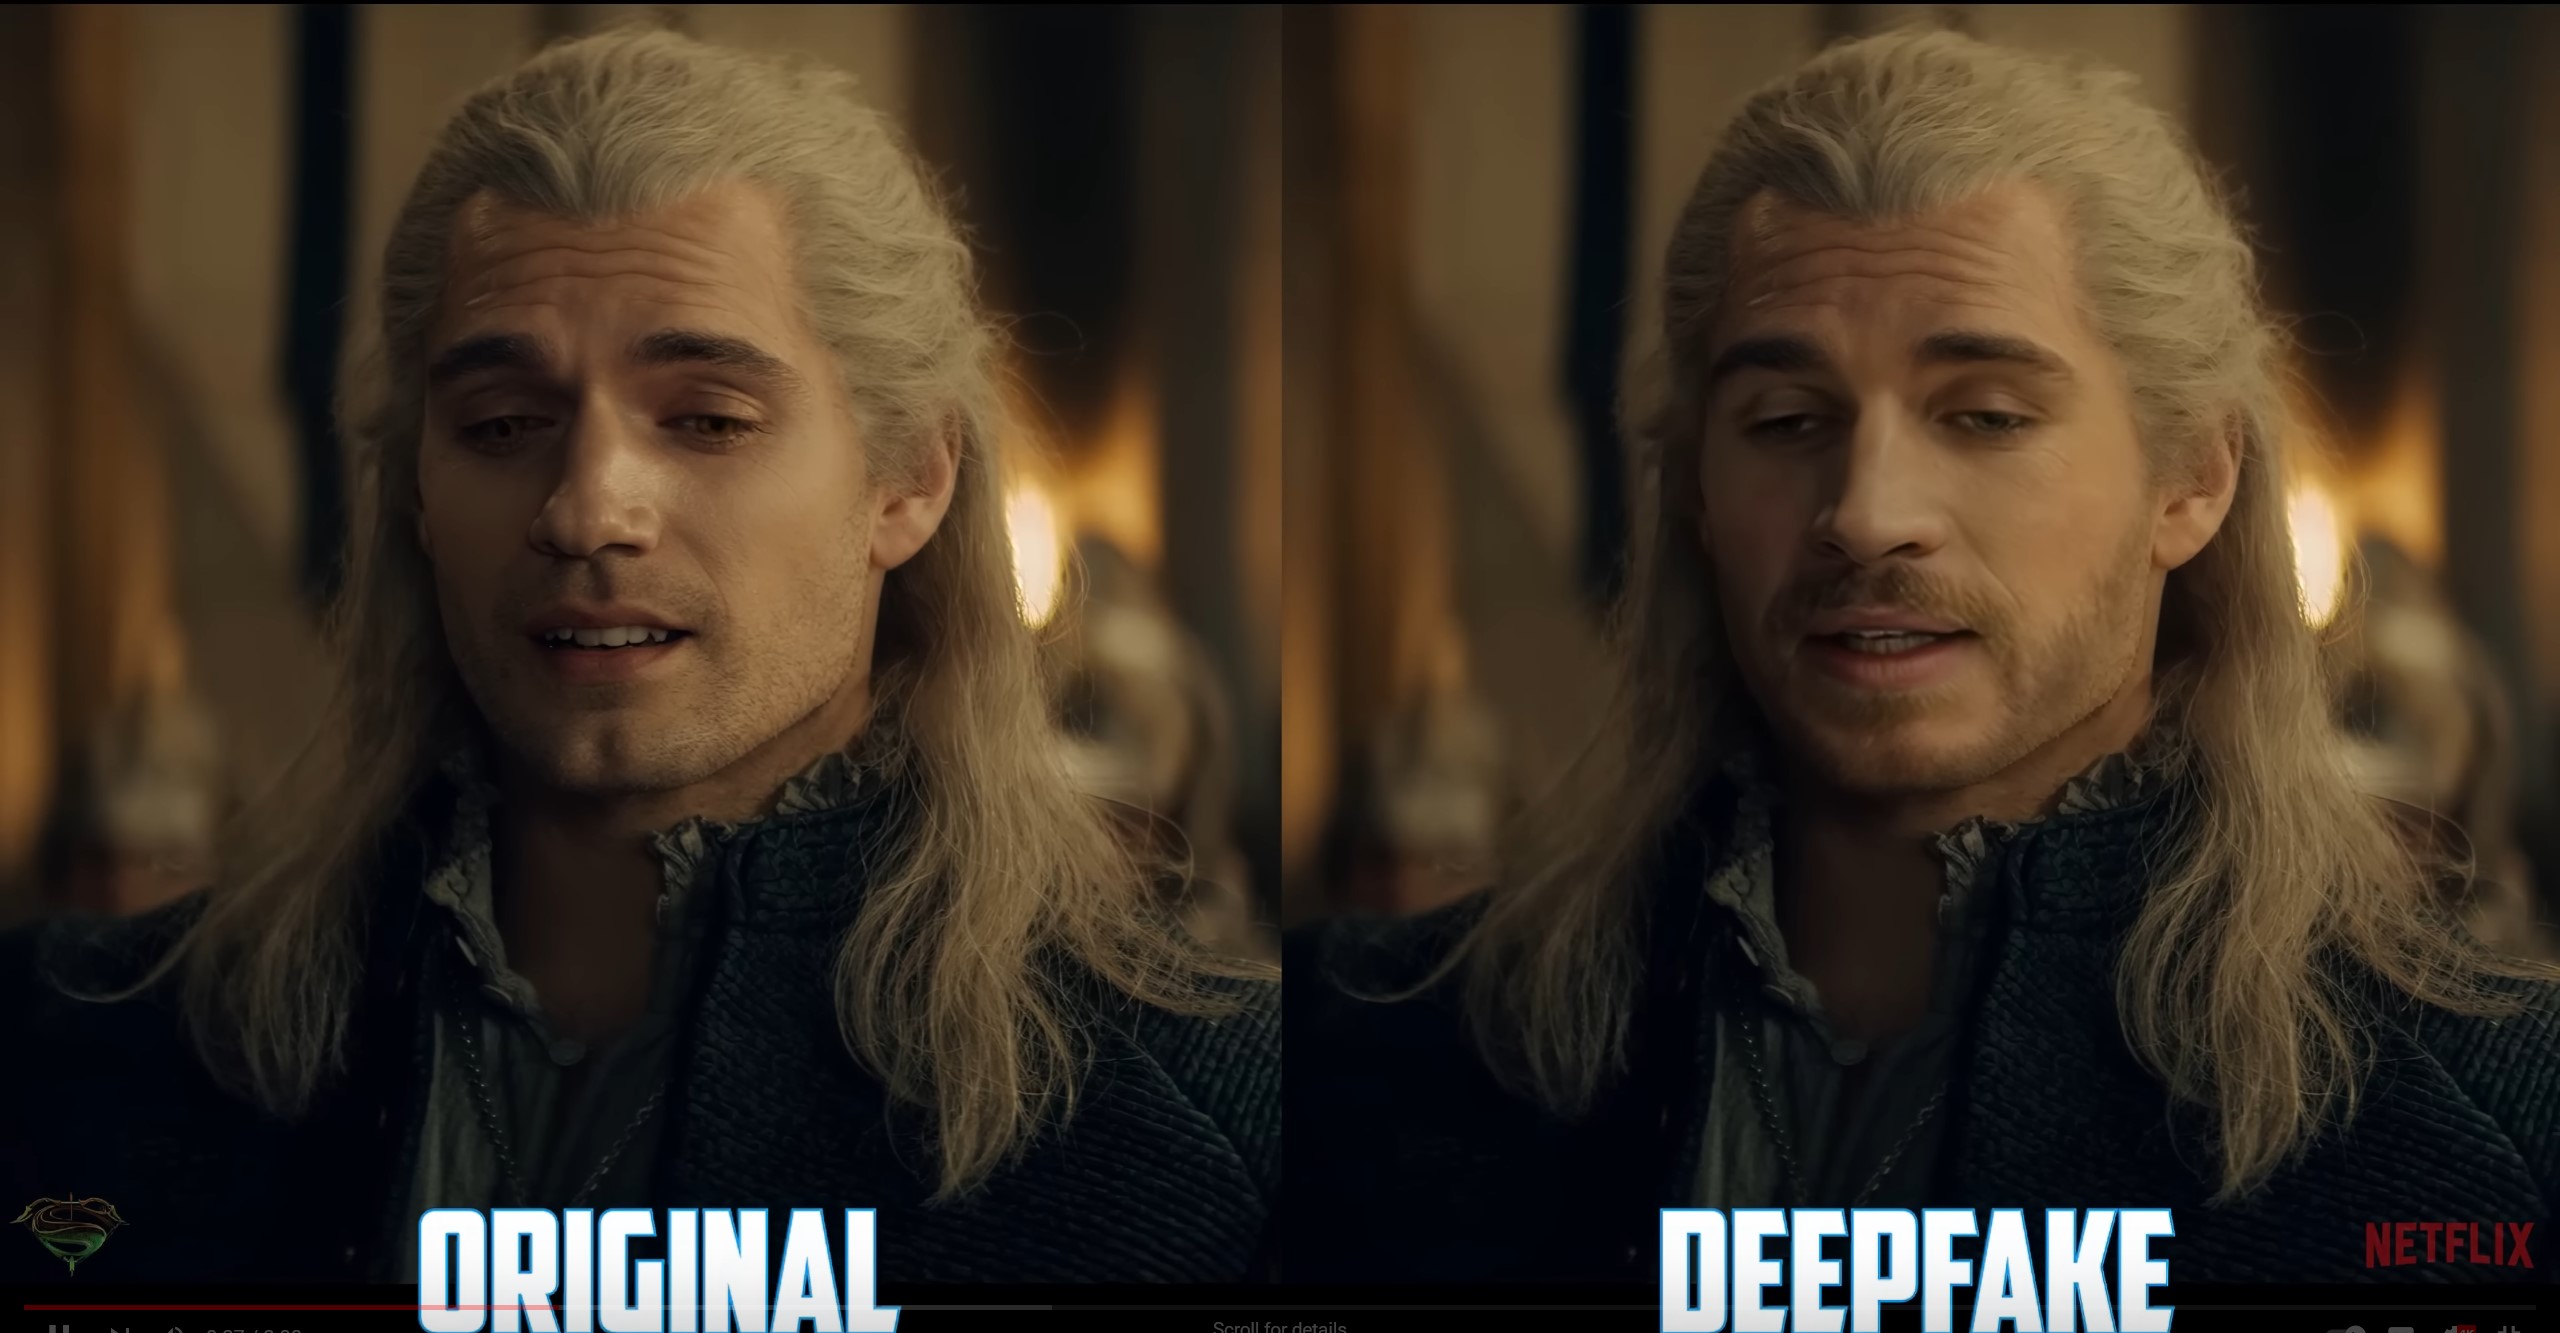 Fan replaces Henry Cavill's face with Liam Hemsworth's in The Witcher trailer